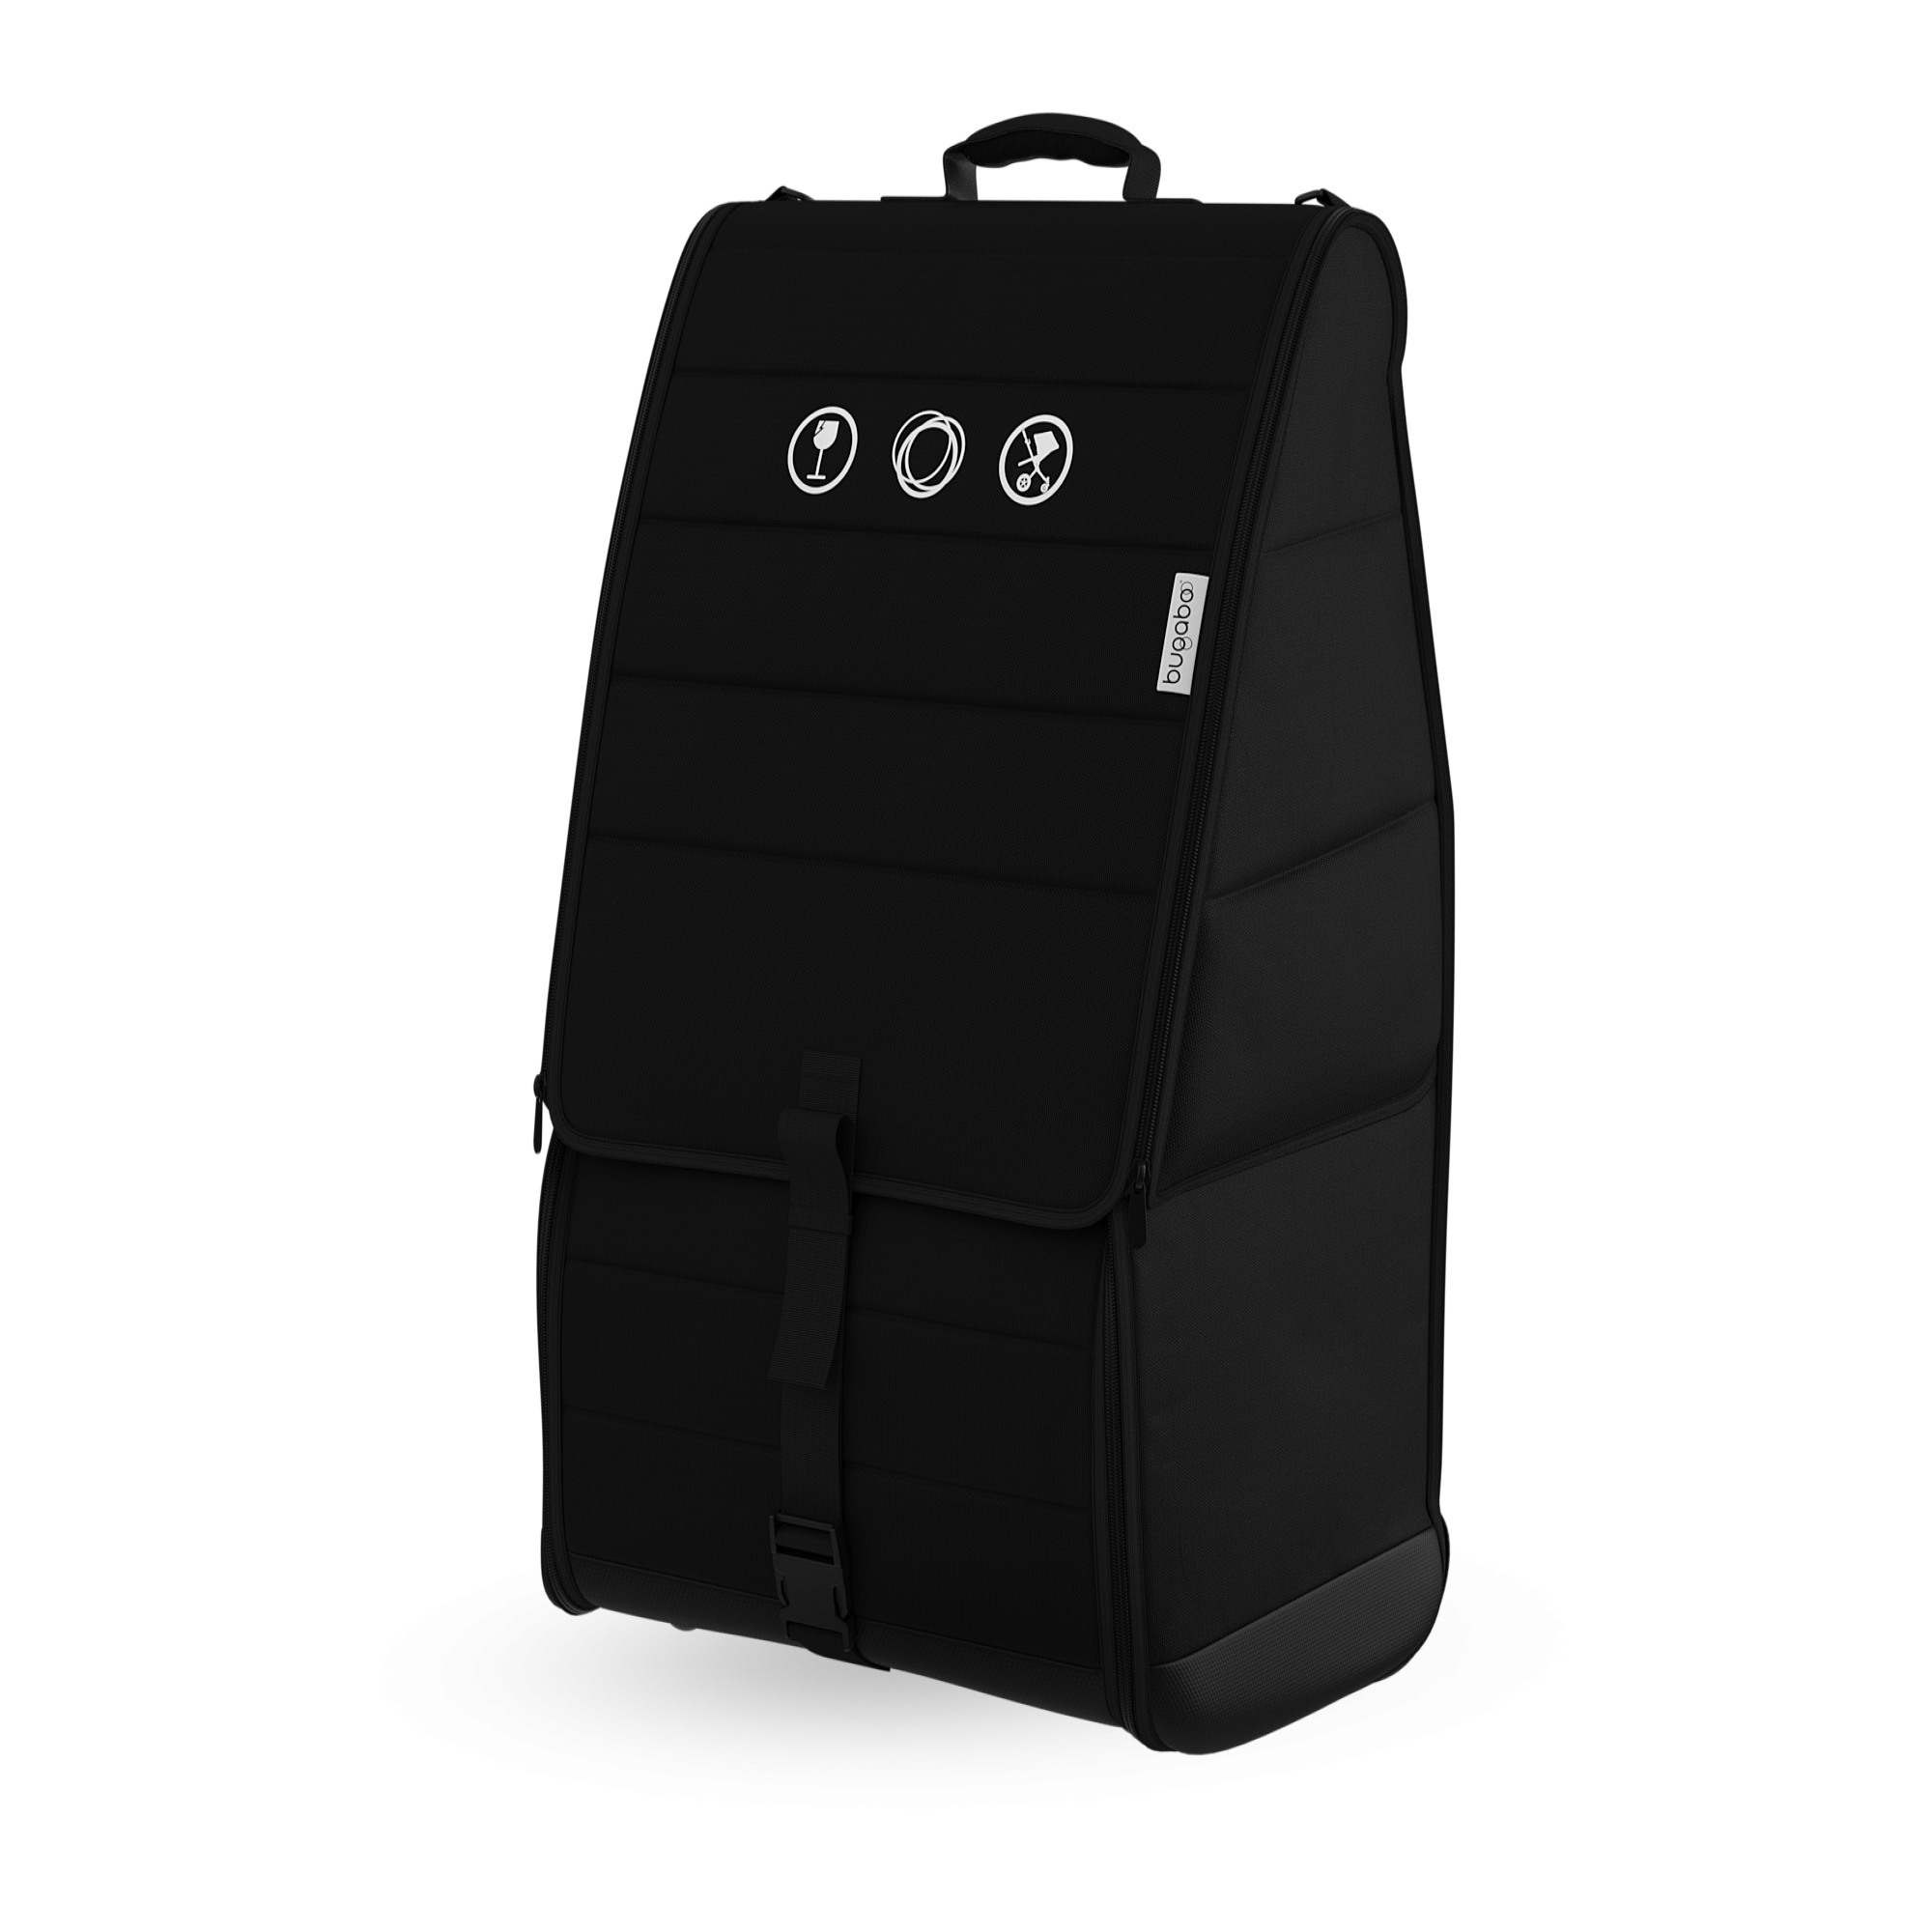 bugaboo carry case